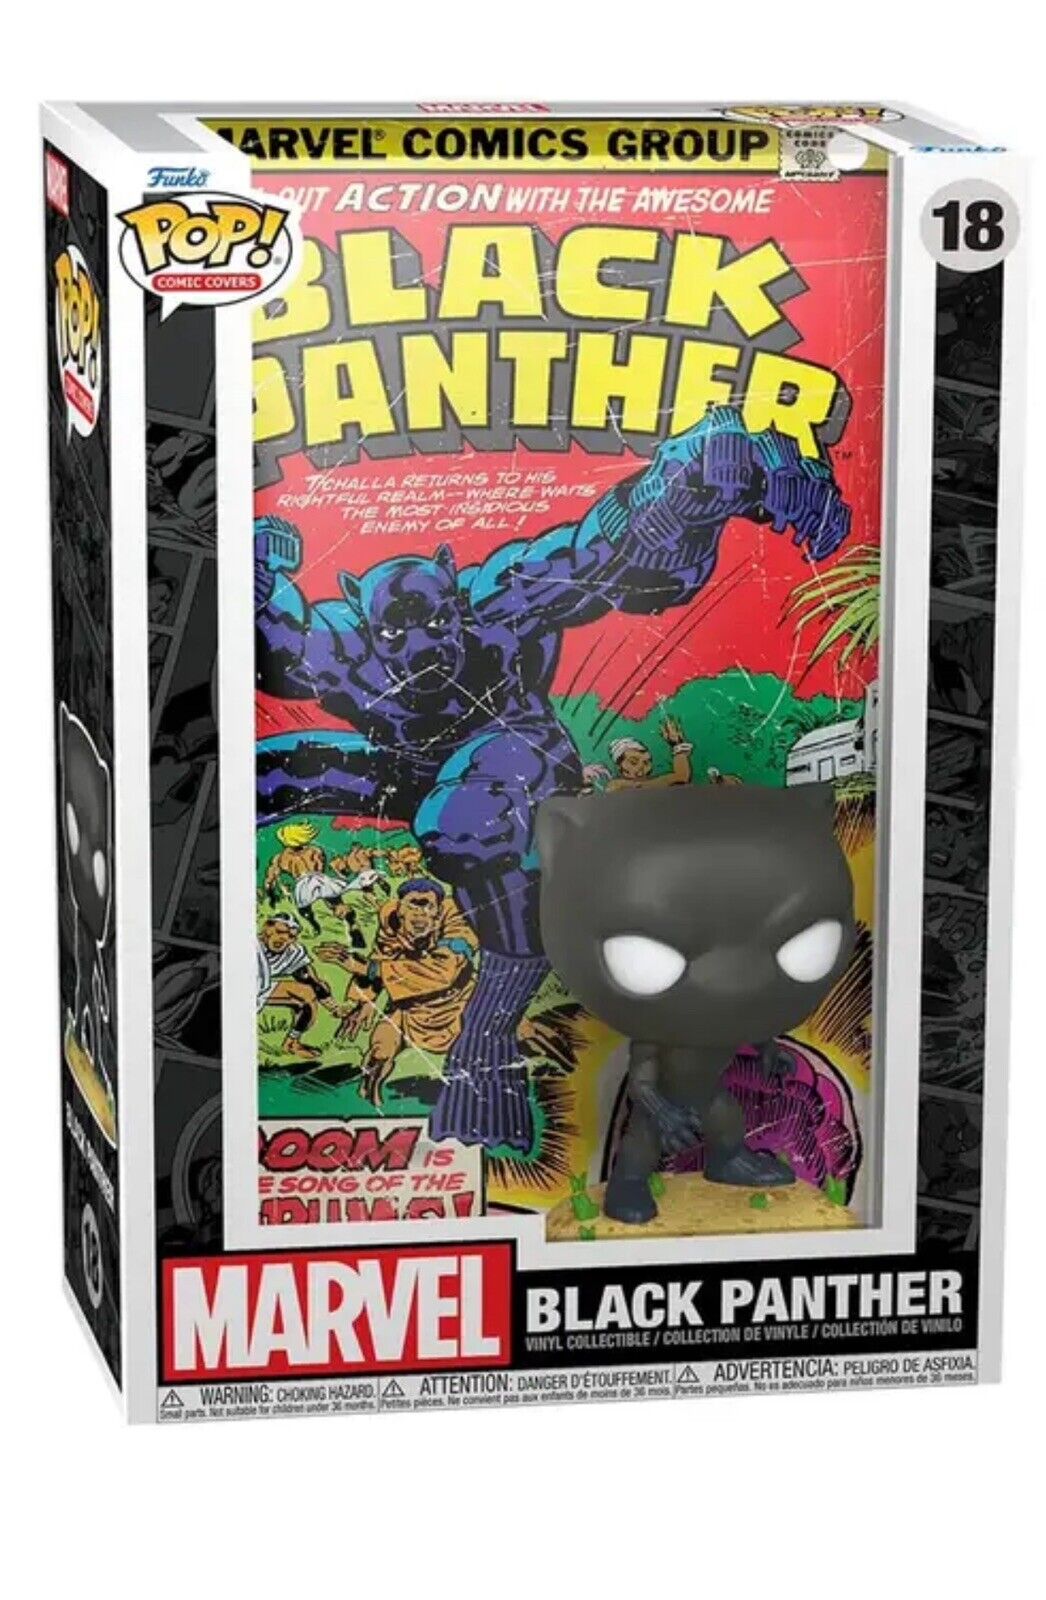 Funko Pop Comic Cover - Marvel - Black Panther #18